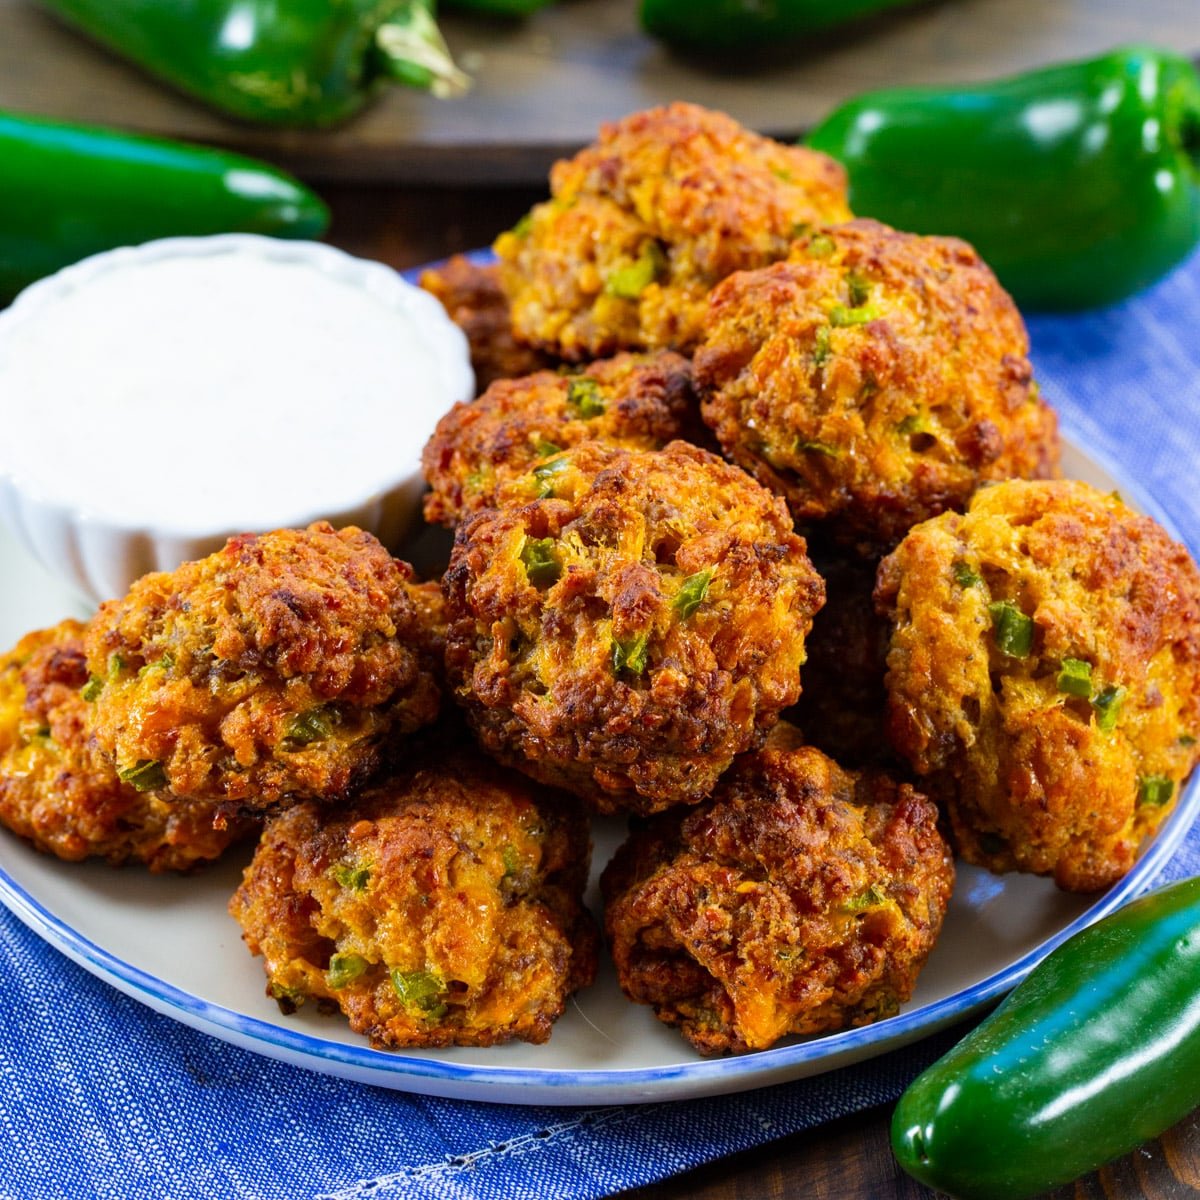 Jalapeno Sausage Balls on a plate with small bowl of ranch dip.